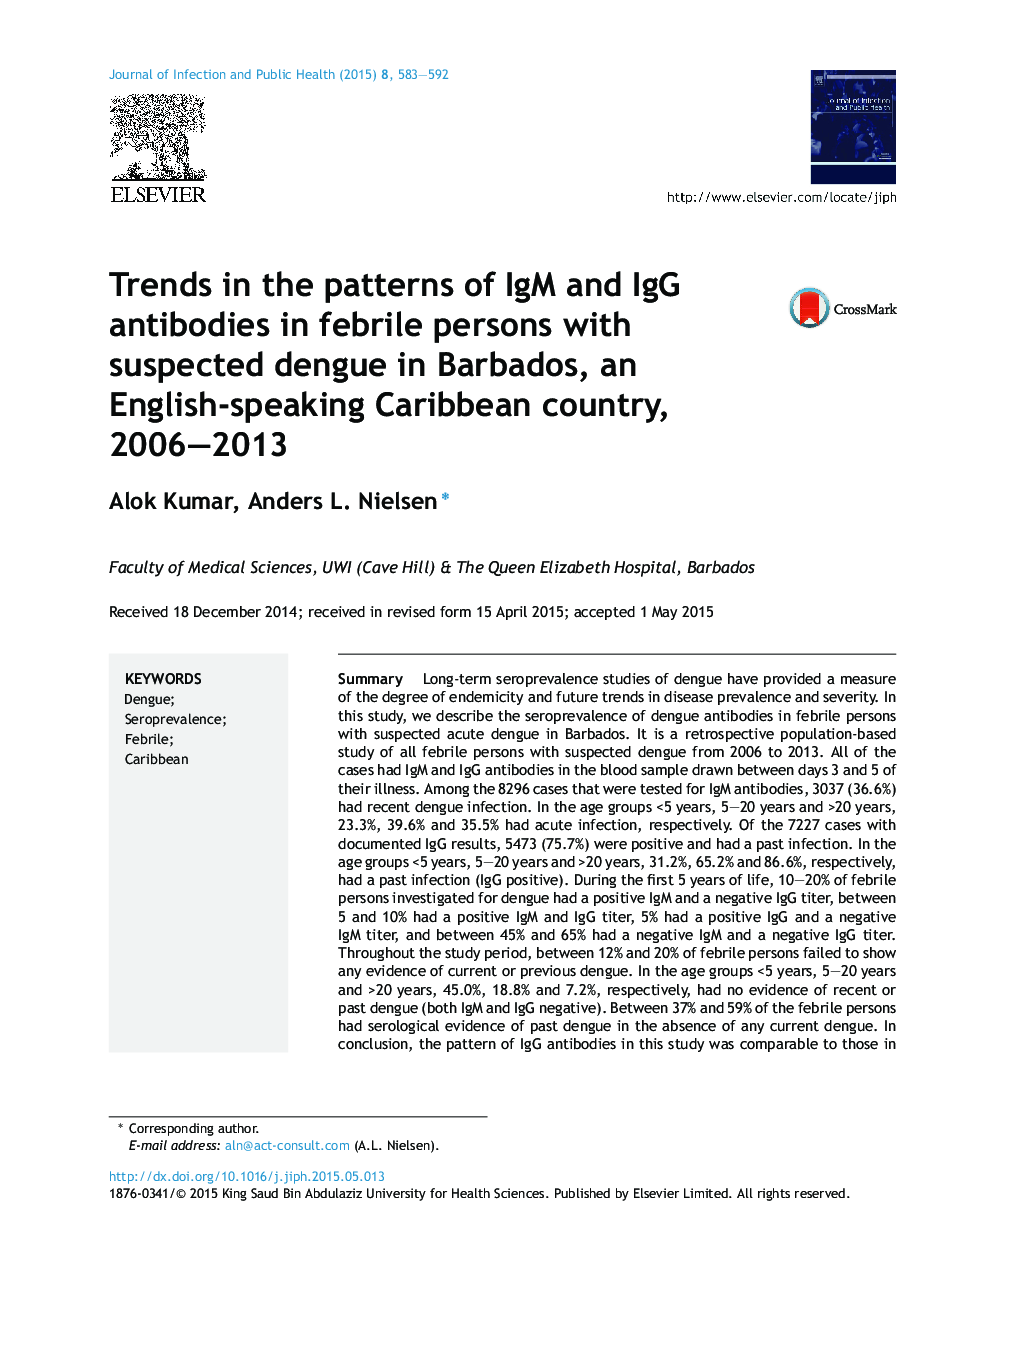 Trends in the patterns of IgM and IgG antibodies in febrile persons with suspected dengue in Barbados, an English-speaking Caribbean country, 2006–2013